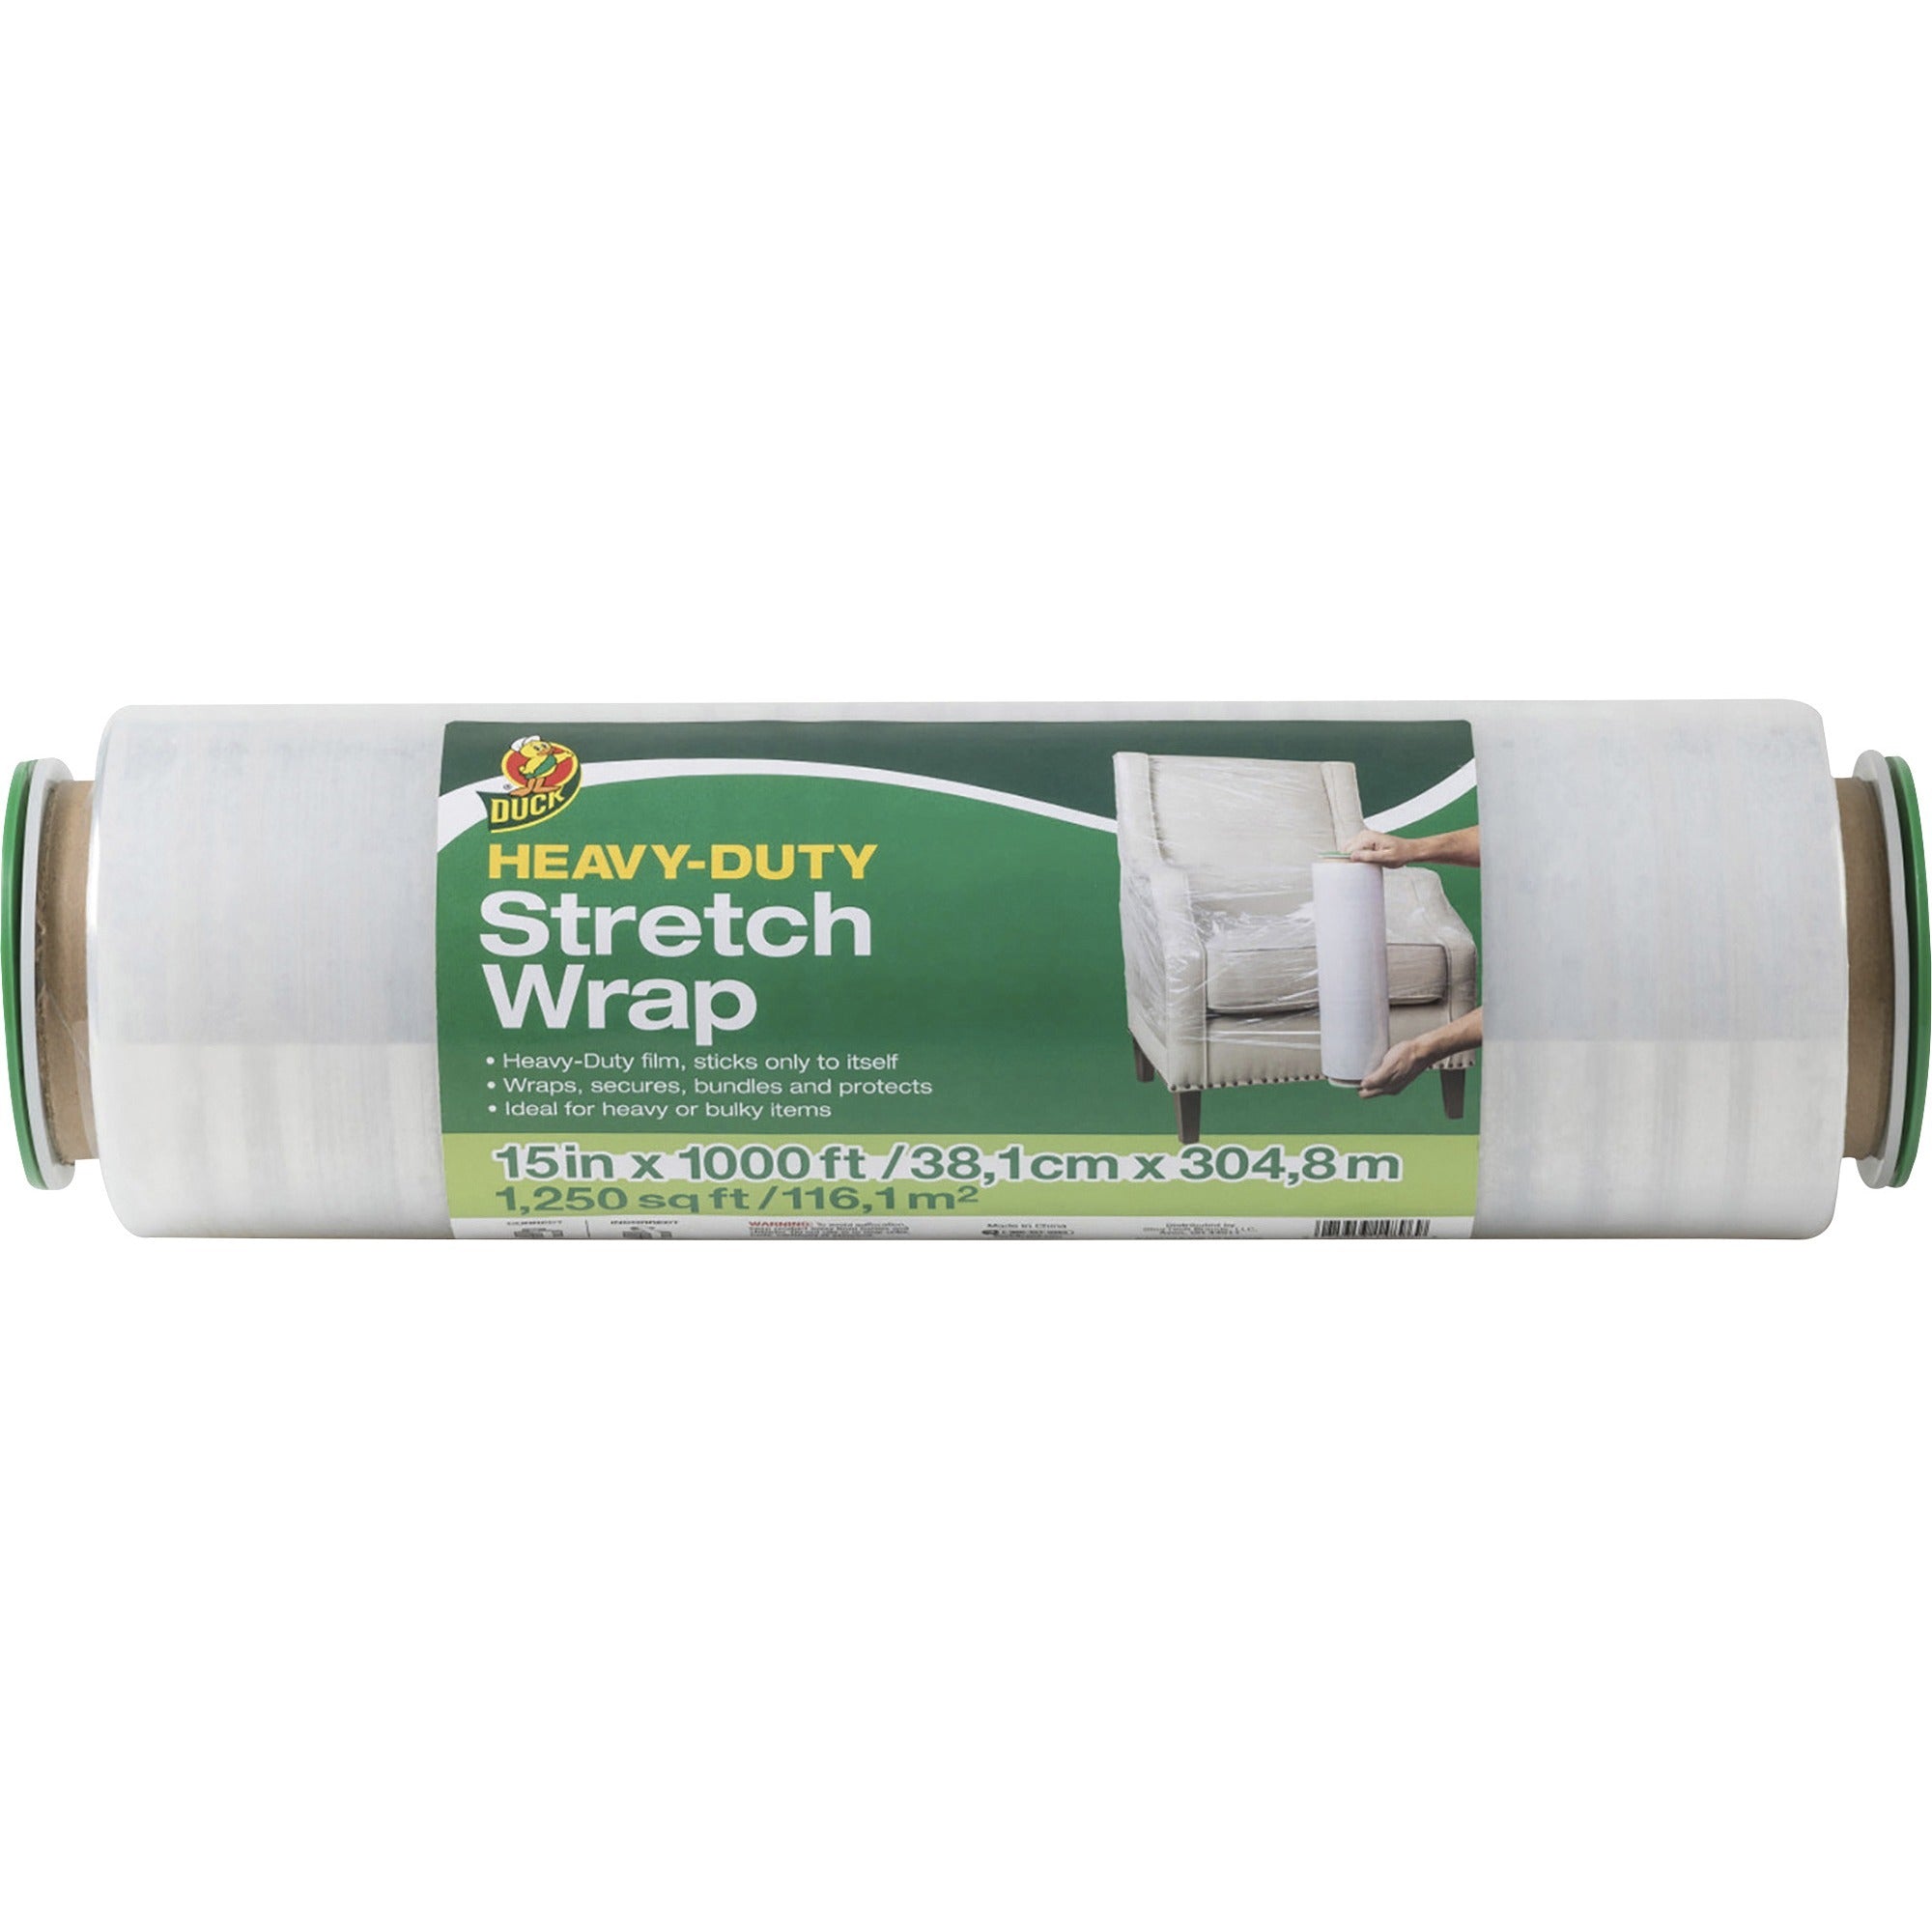 duck-heavy-duty-stretch-wrap-15-width-x-1000-ft-length-heavy-duty-handle-self-stick-residue-free-non-adhesive-plastic-clear-1each_duc285709 - 2